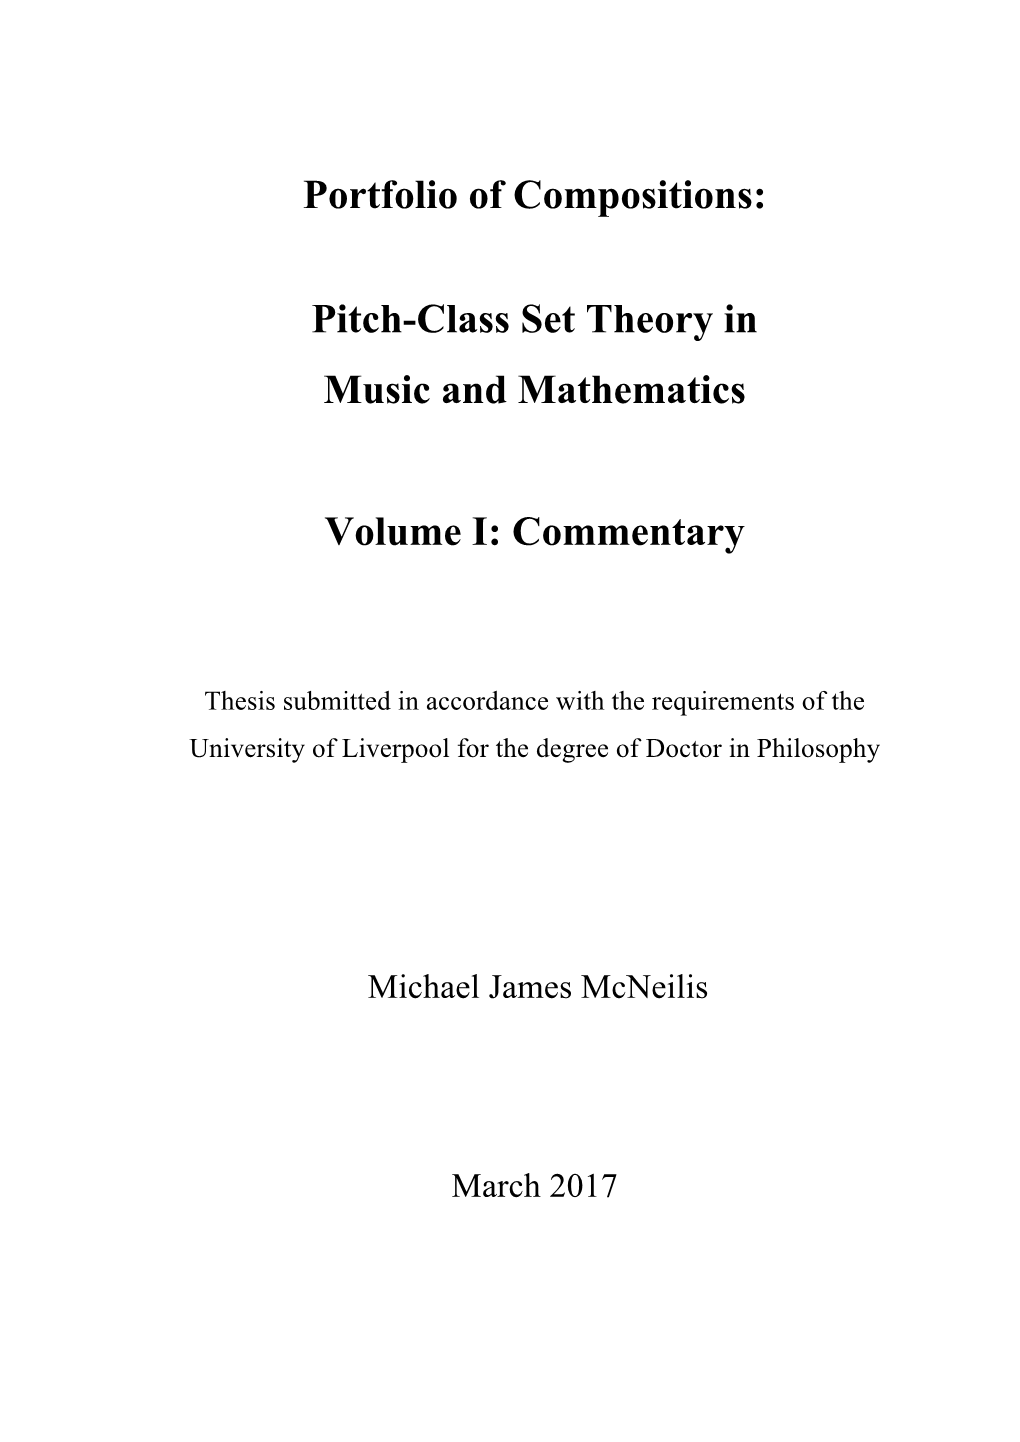 Pitch-Class Set Theory in Music and Mathematics Volume I